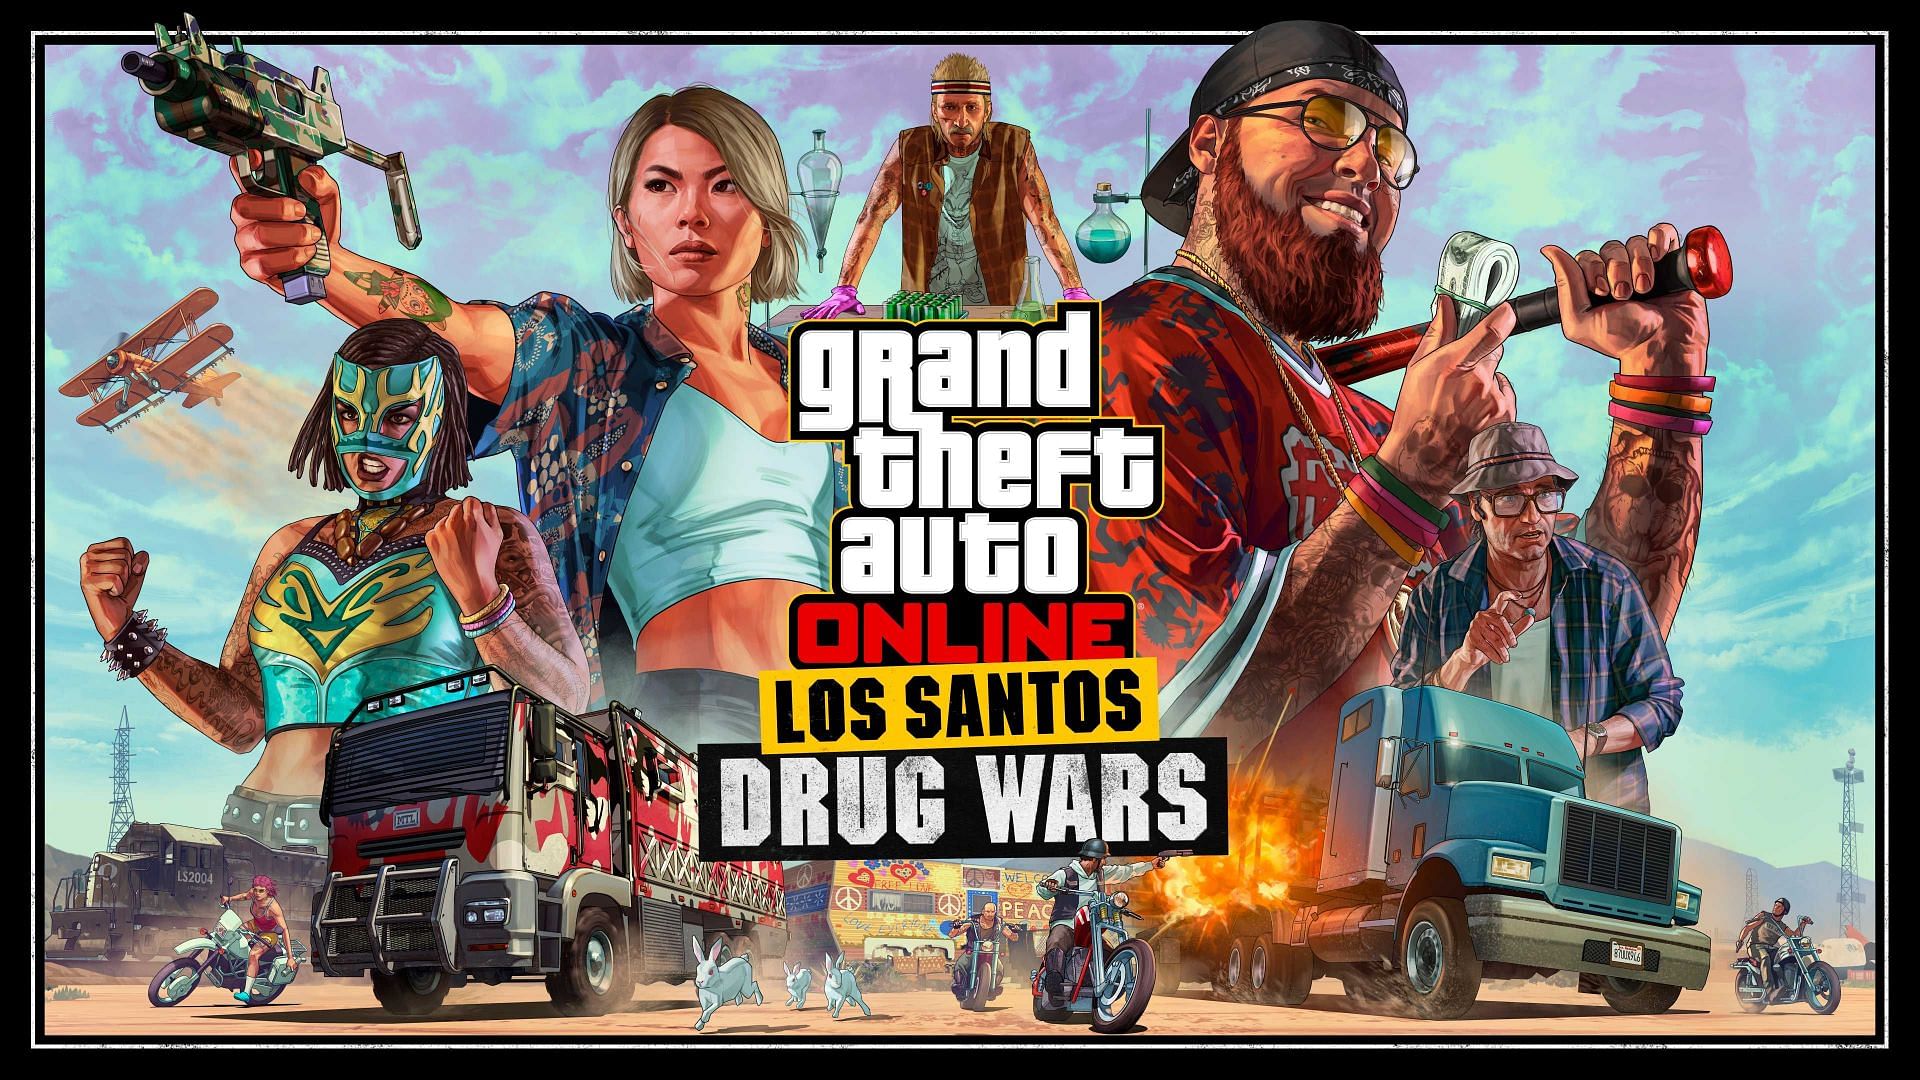 The Los Santos Drug Wars had two main updates regarding the release of its missions (Image via Rockstar Games)